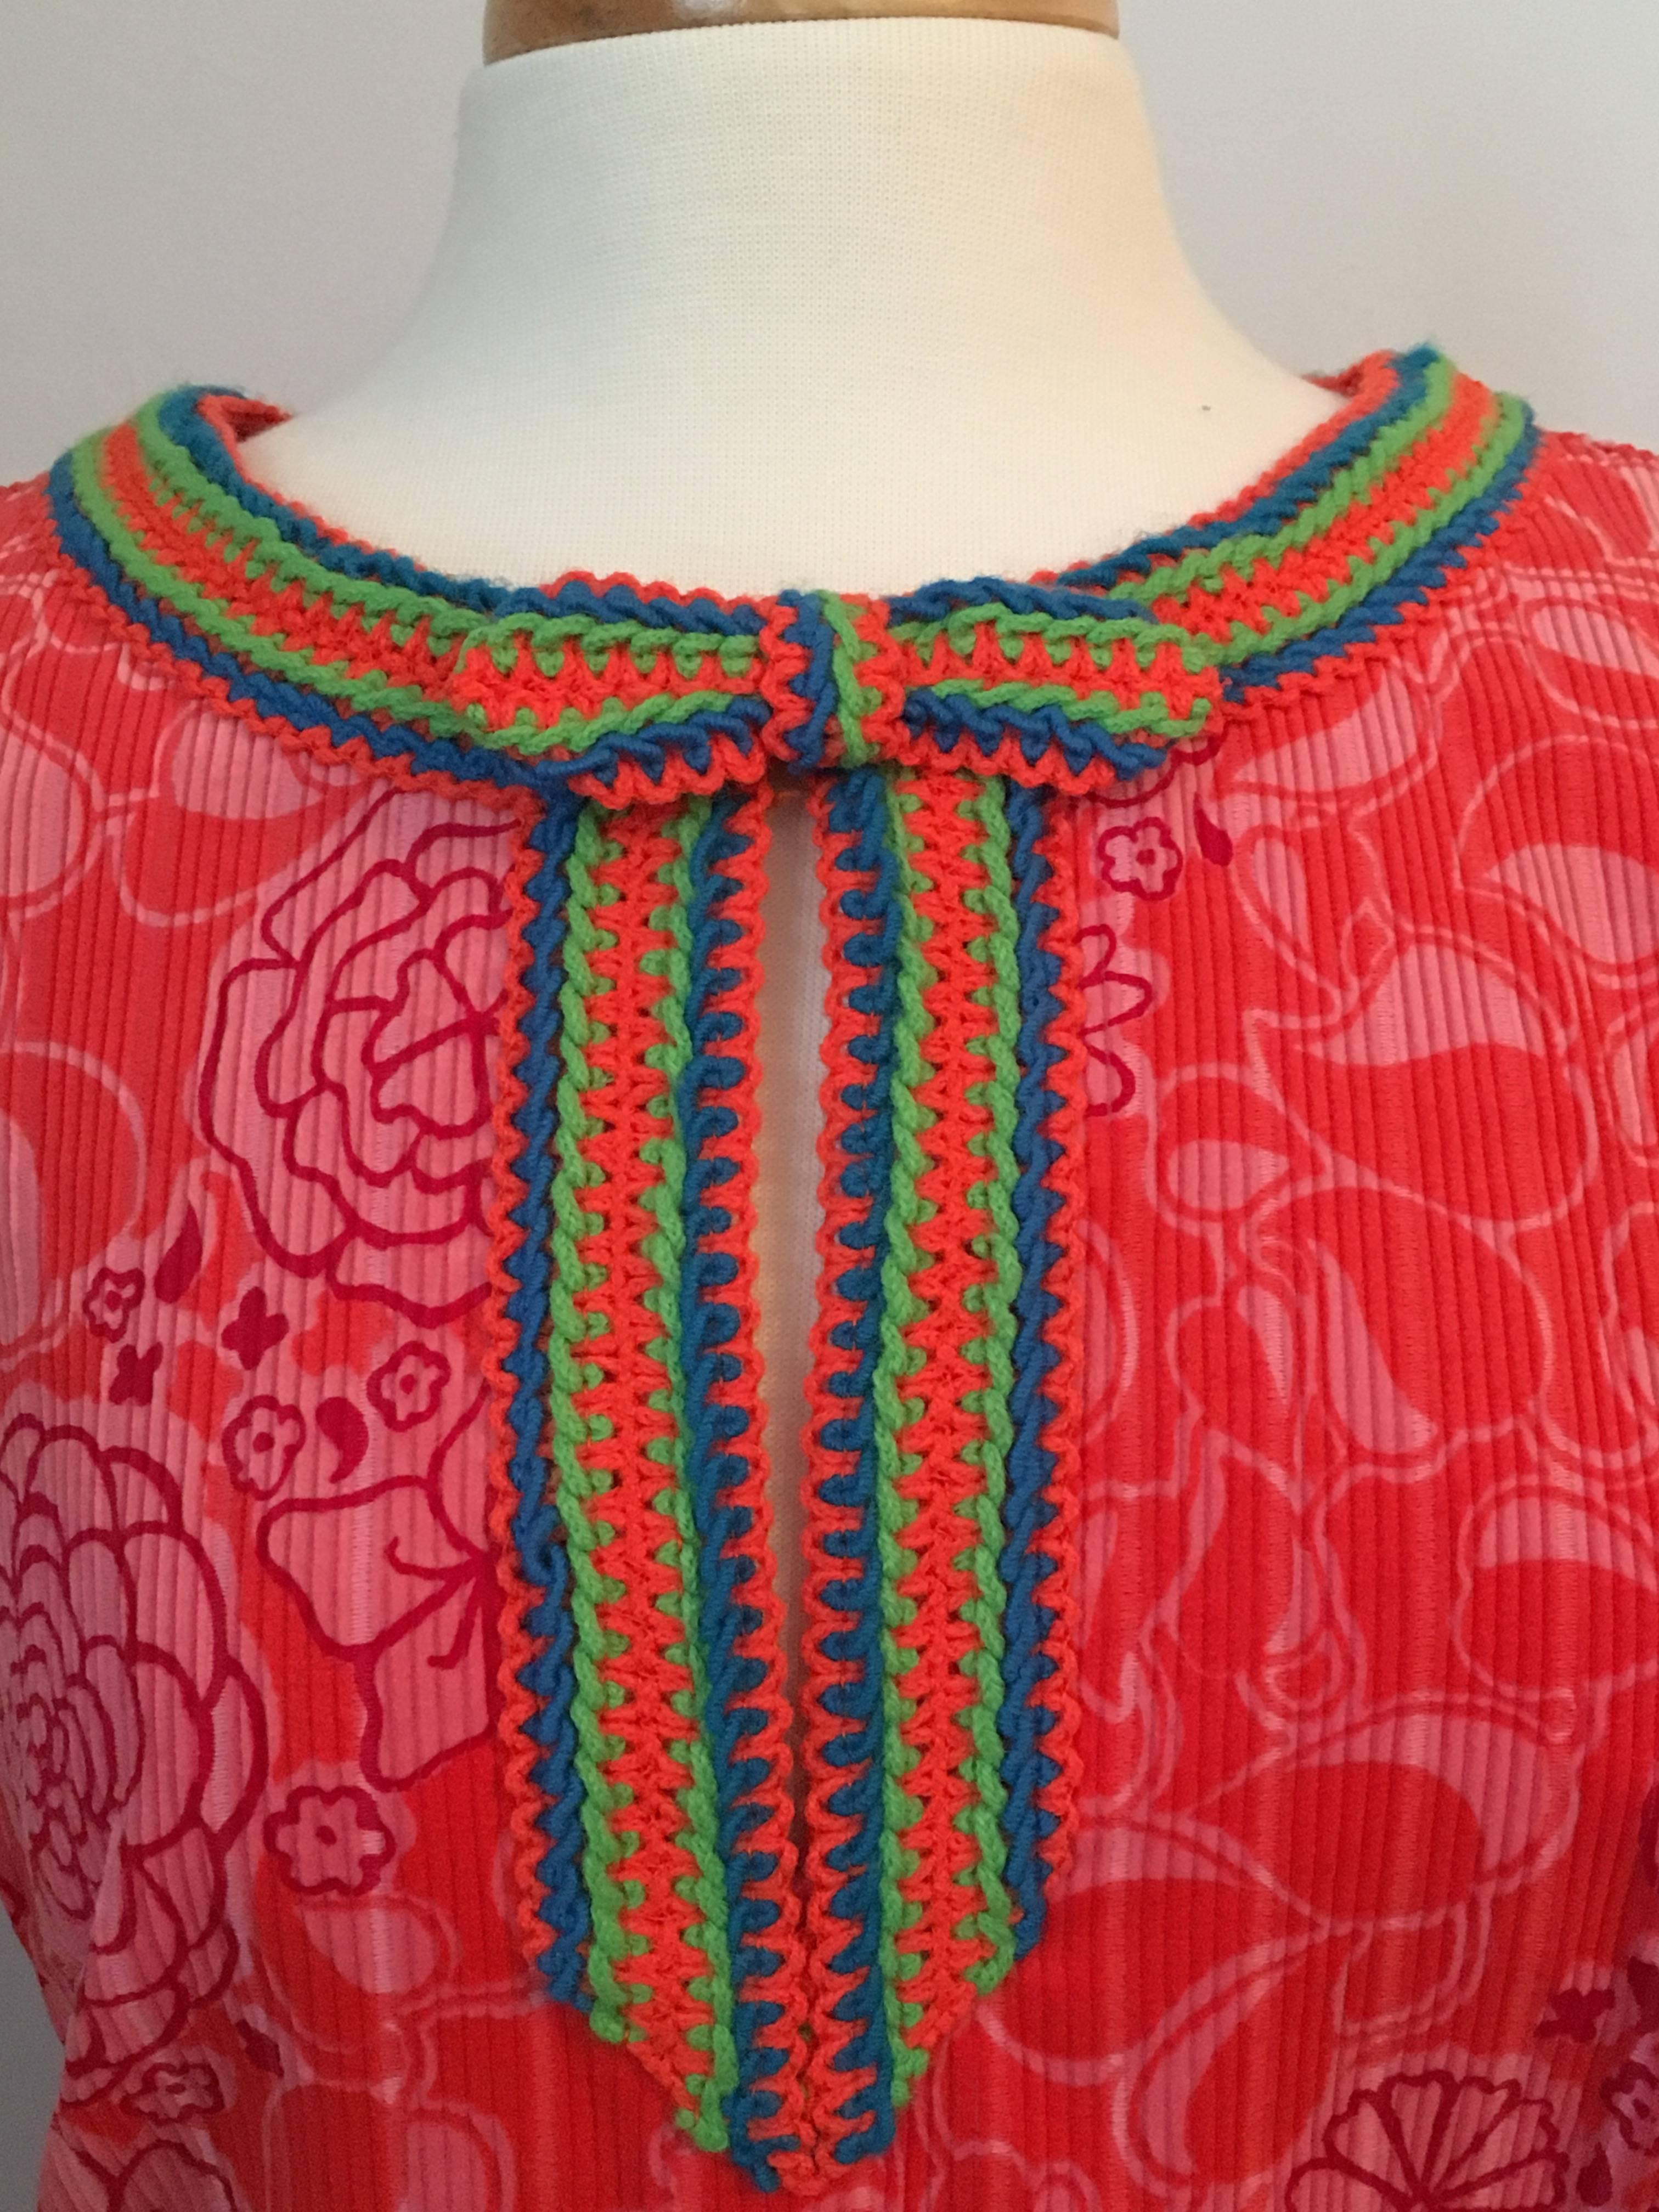 1960s Lilly Pulitzer Floral Printed Corduroy Caftan with Striped Trim In Excellent Condition For Sale In Chicago, IL